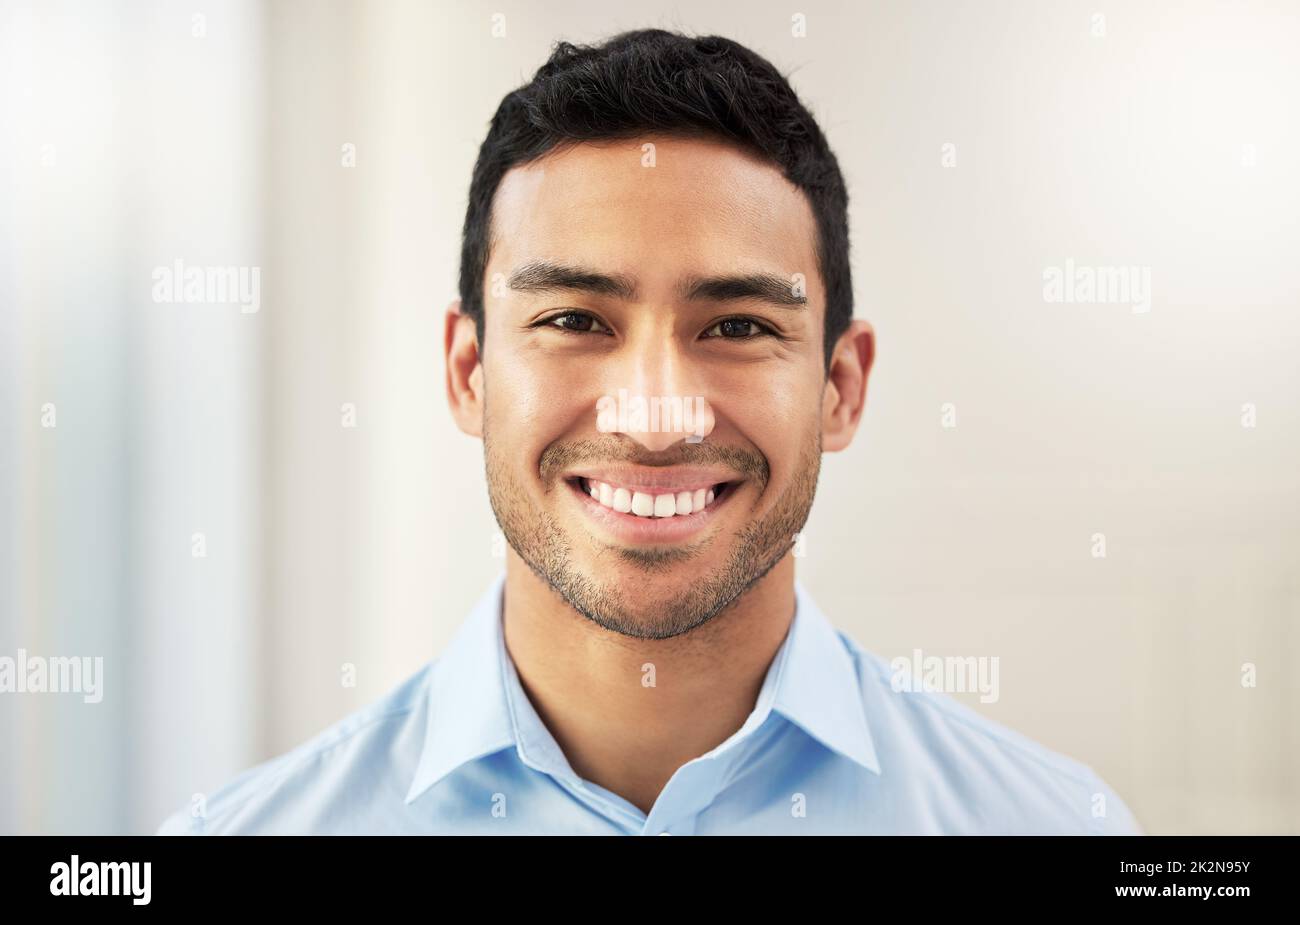 Proud of the professional goals Ive reached. Shot of a handsome young businessman in his office. Stock Photo